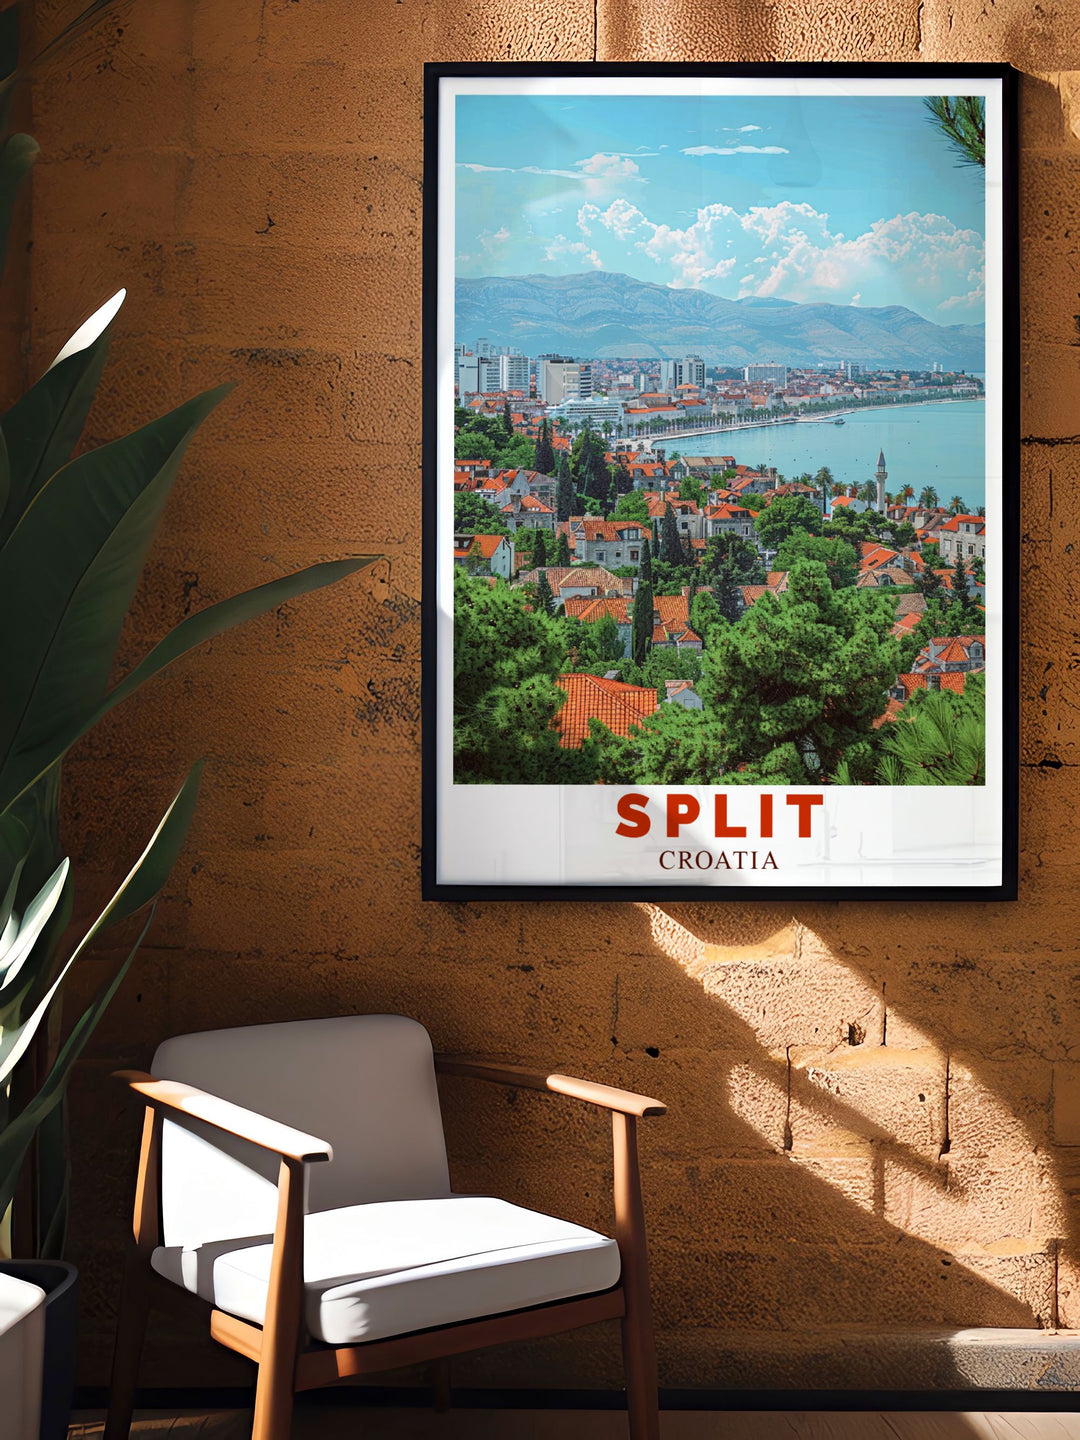 This poster of Split captures the breathtaking views and rich history of Marjan Hill, inviting viewers to experience the unique charm and adventure of Croatia.